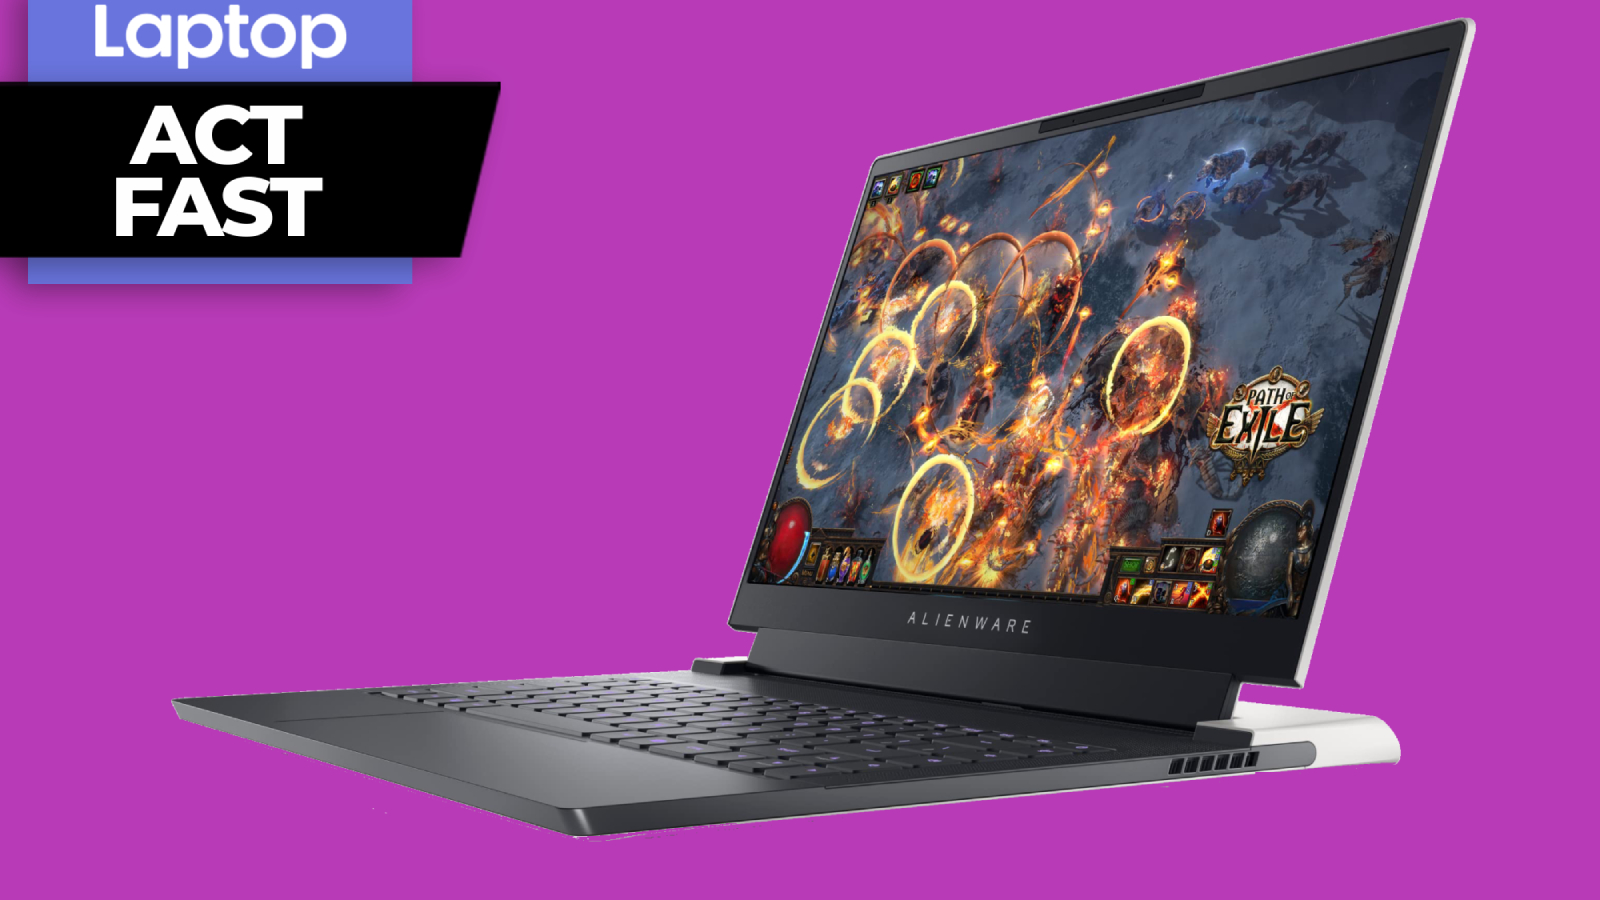 Save $450 on the Alienware x14 Gaming Laptop